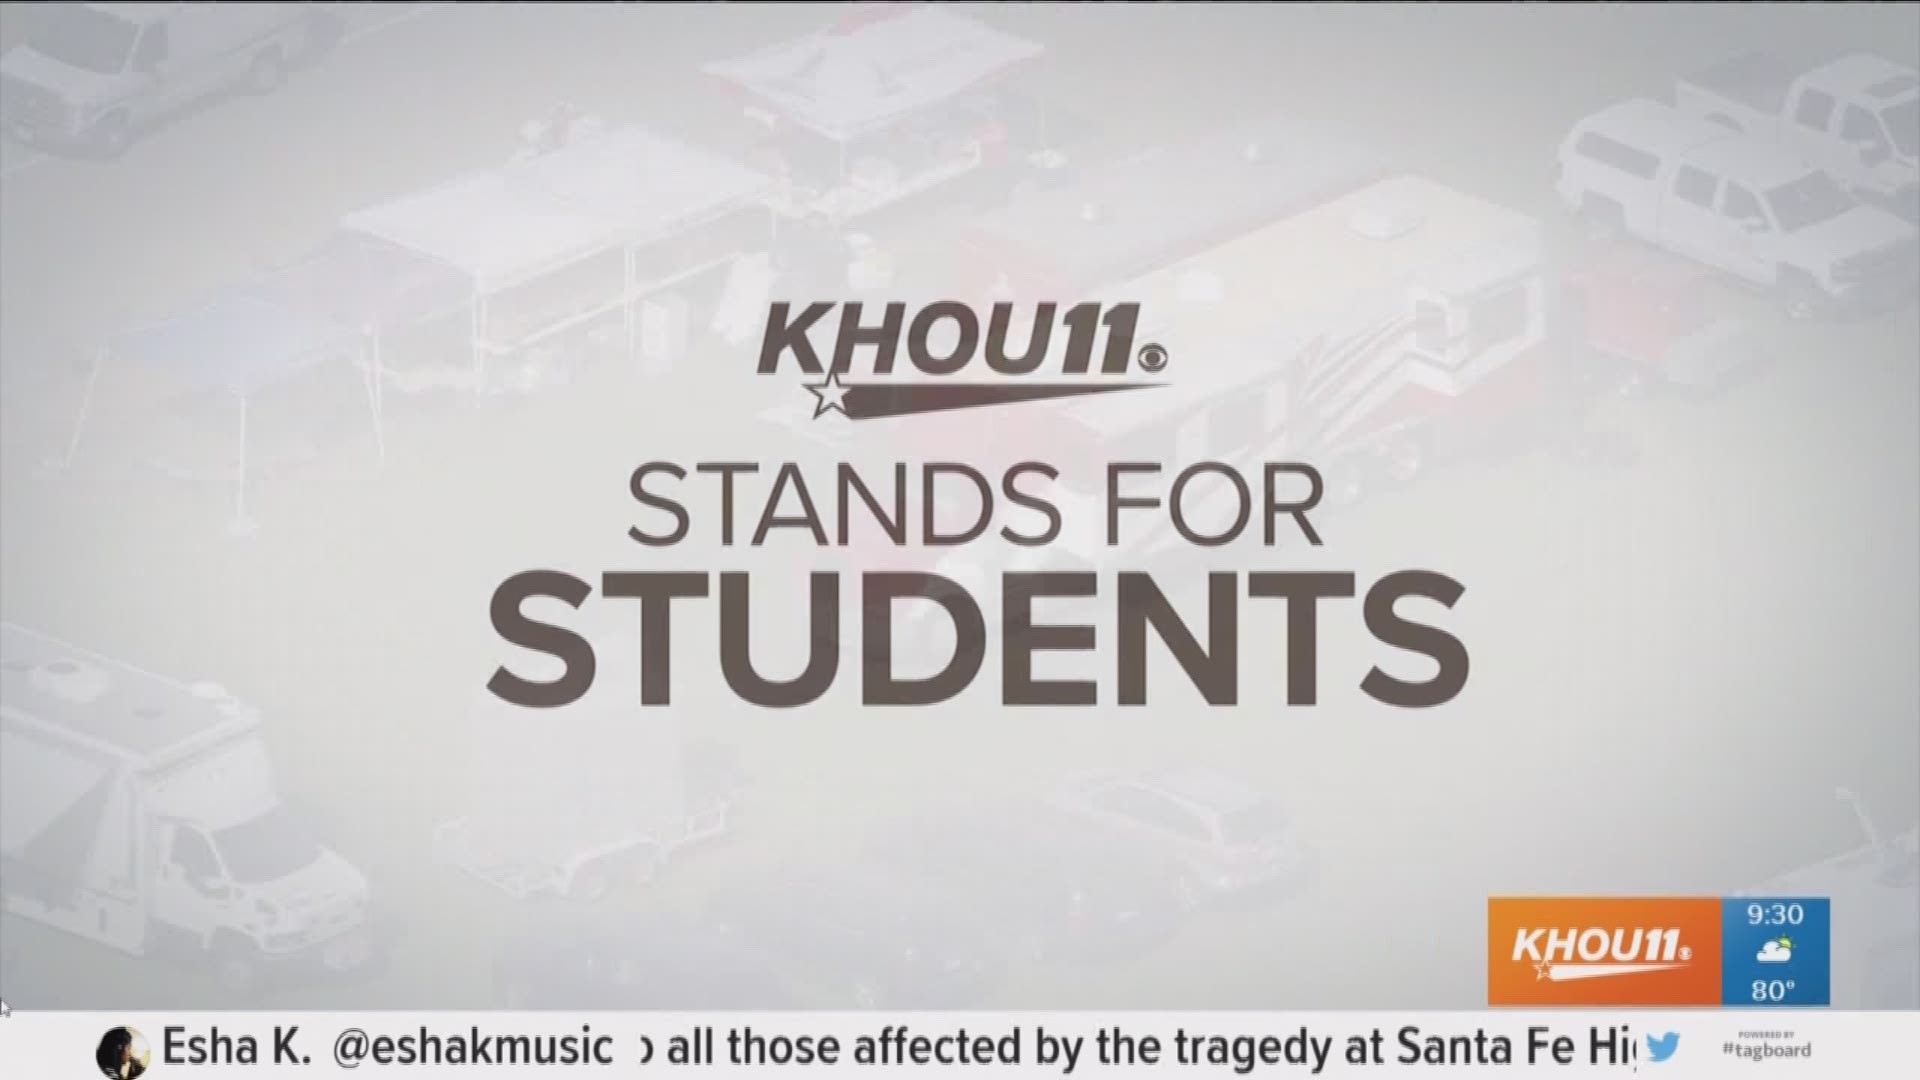 Air 11 gives a look at Santa Fe High School a little more than 24 hours after the mass shooting. 